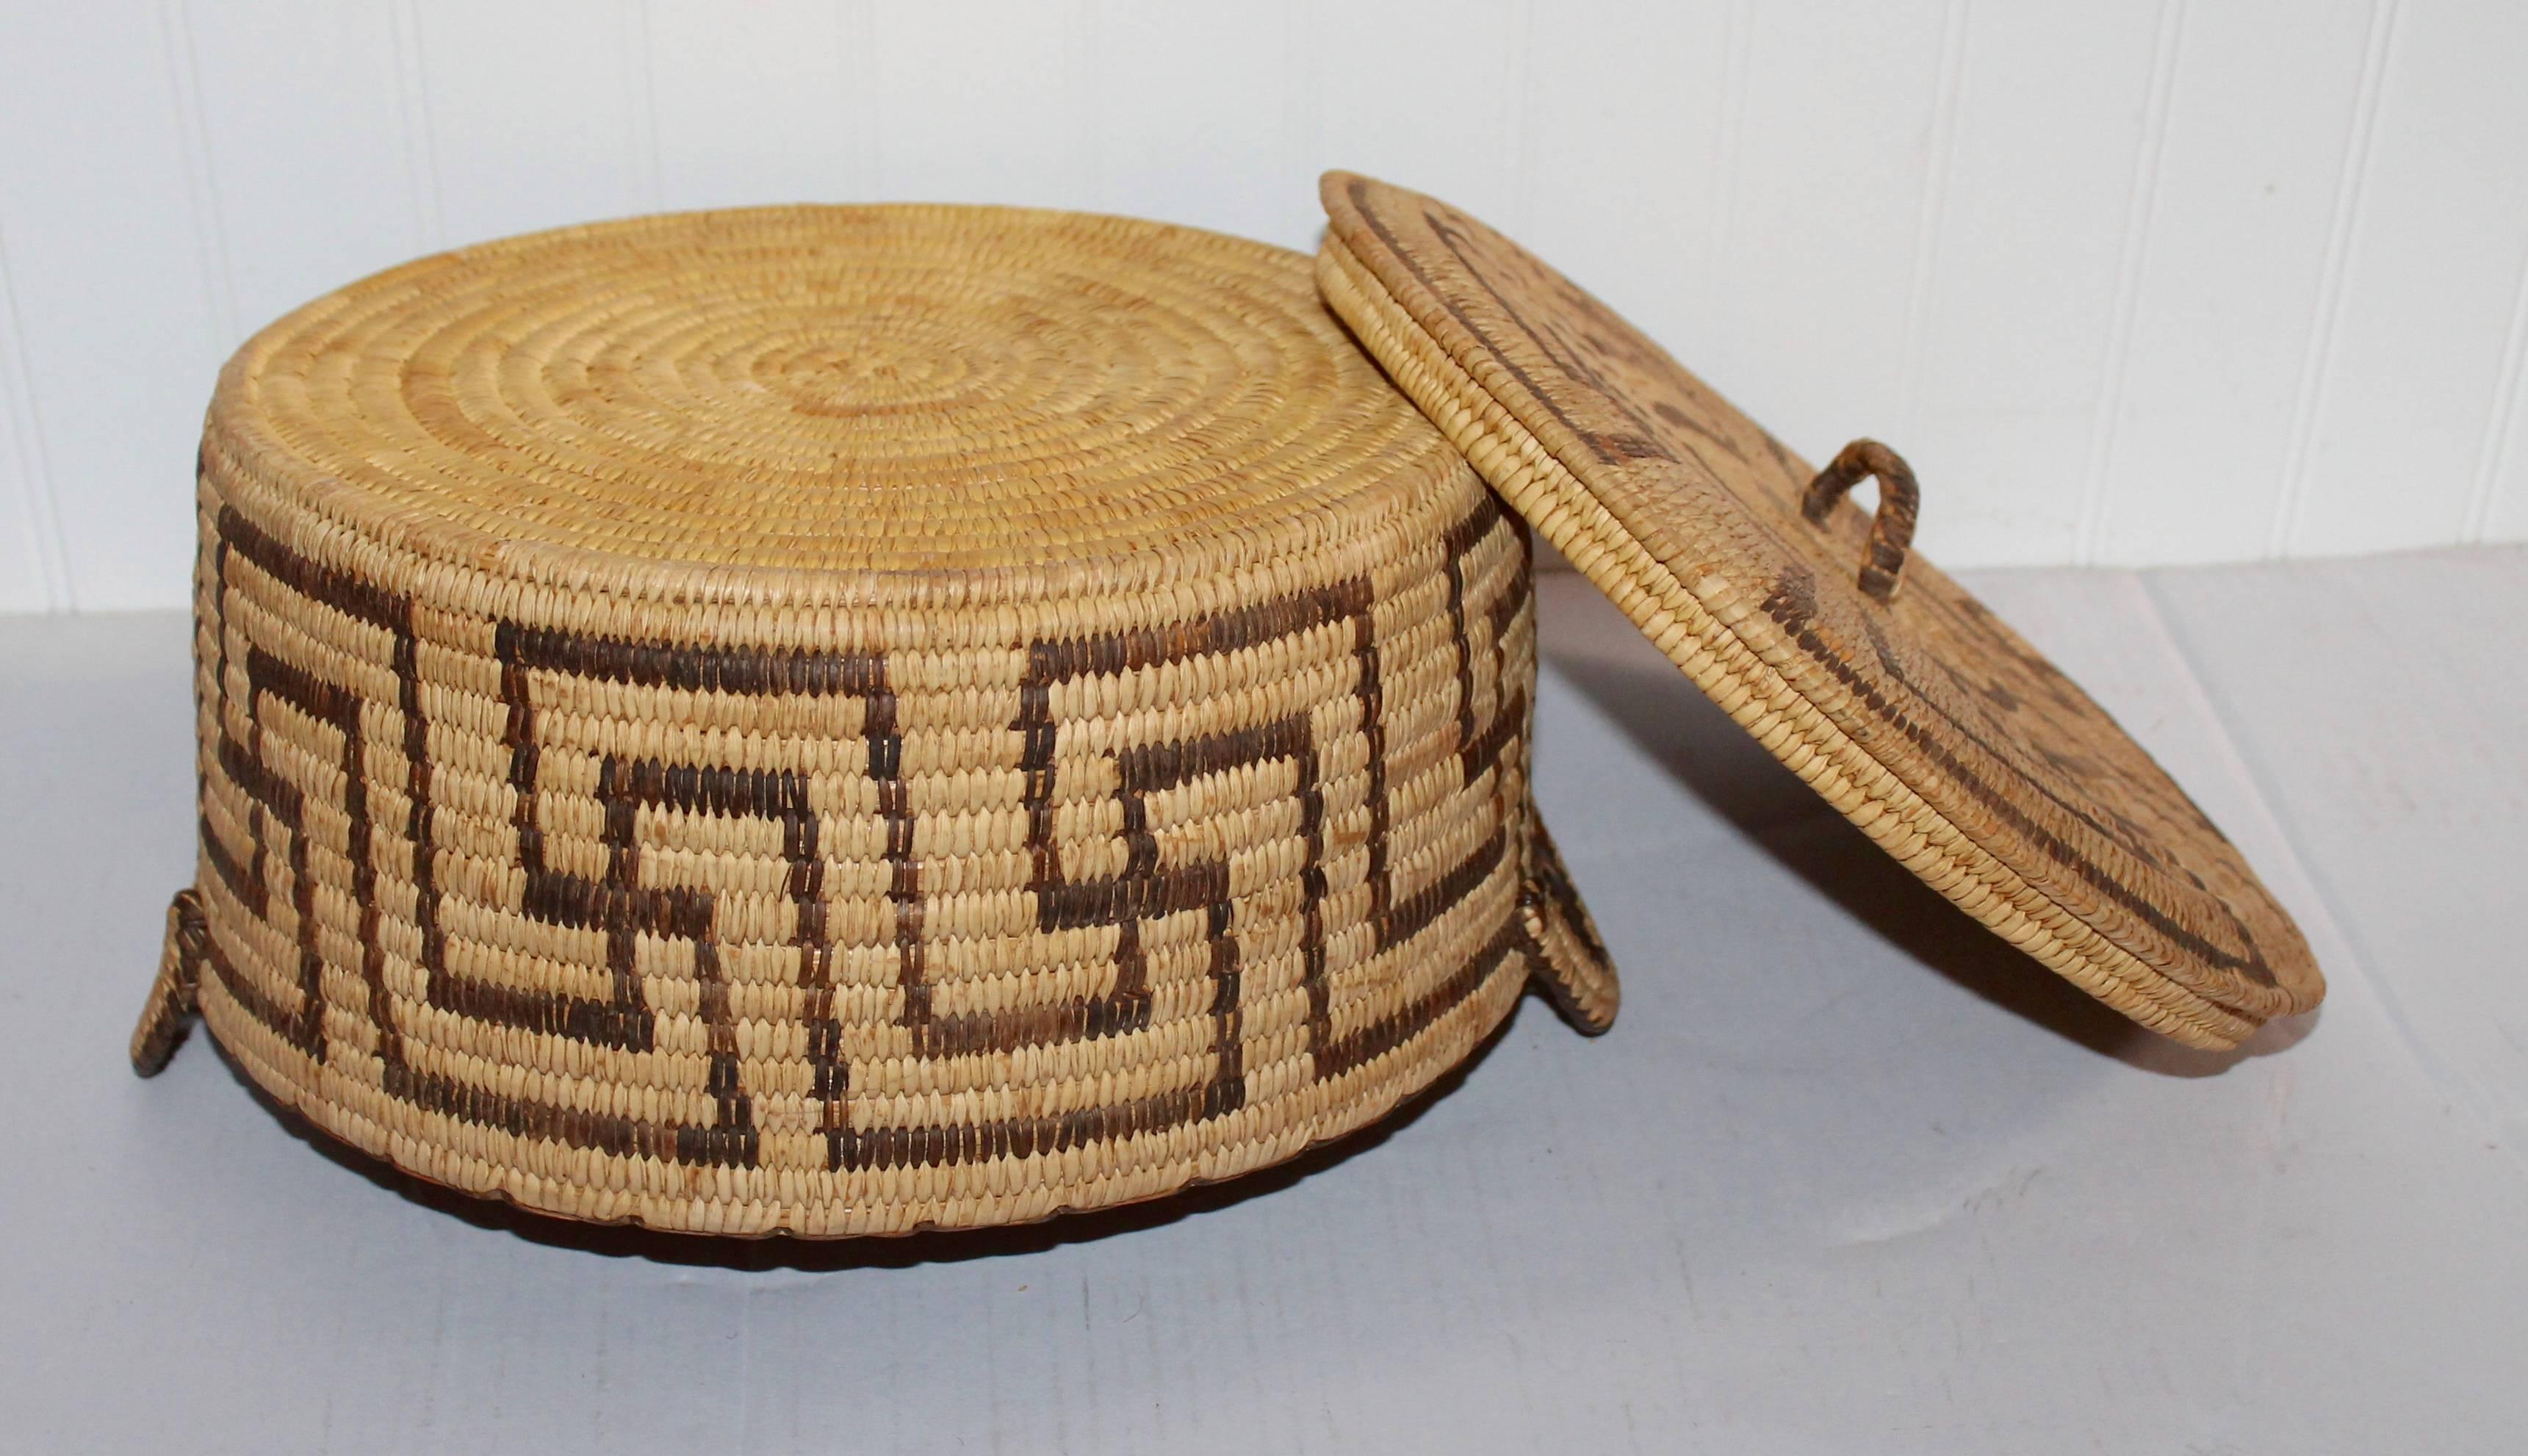 Hand-Woven Amazing Lided Papago Basket with Handles